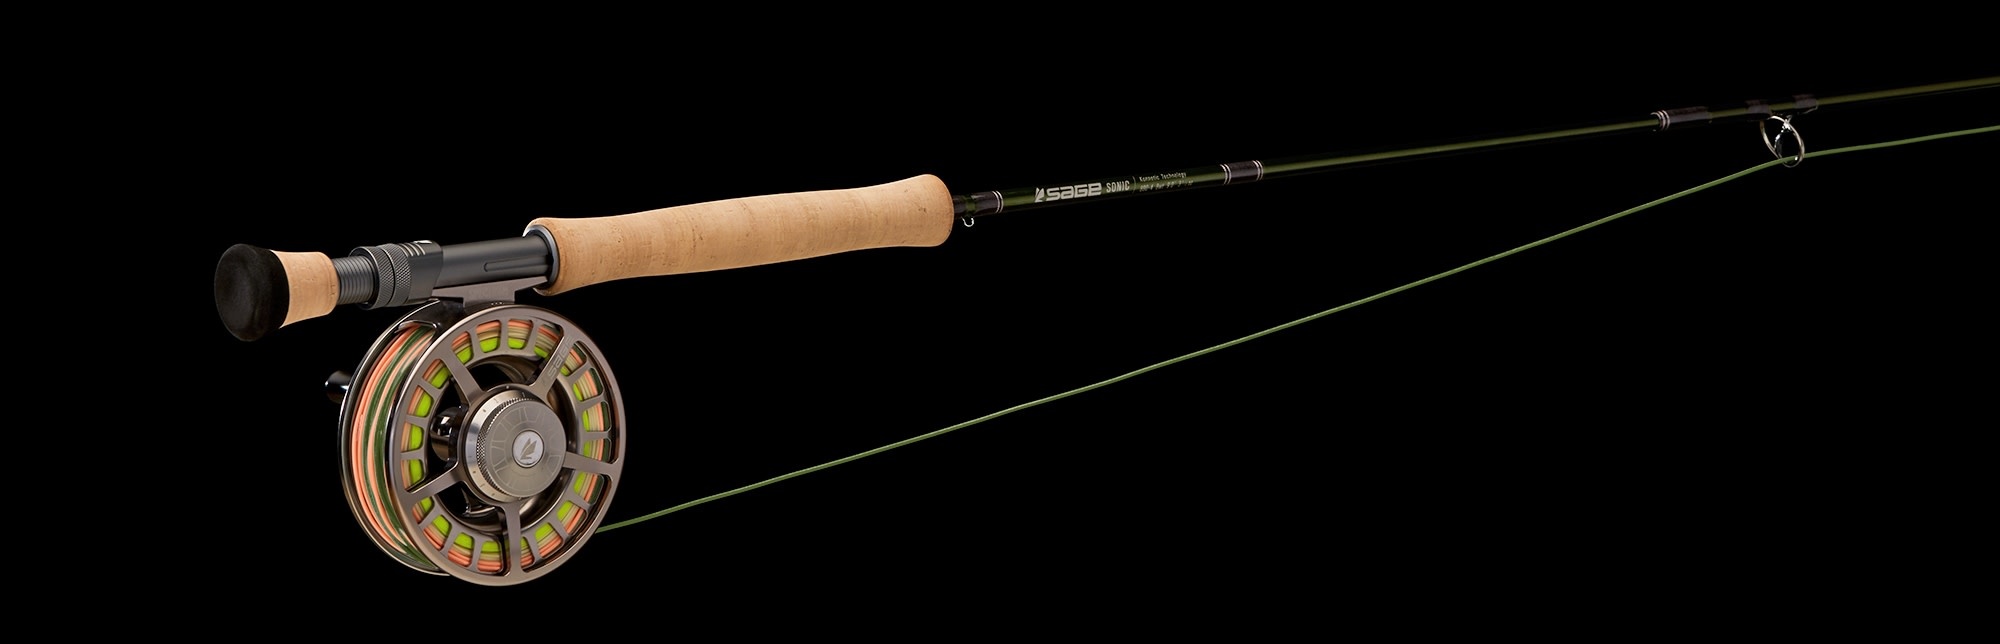  Fly Fishing Rod & Reel Combos - Sage / Fly Fishing Rod & Reel  Combos / Fly Fishi: Sports & Outdoors